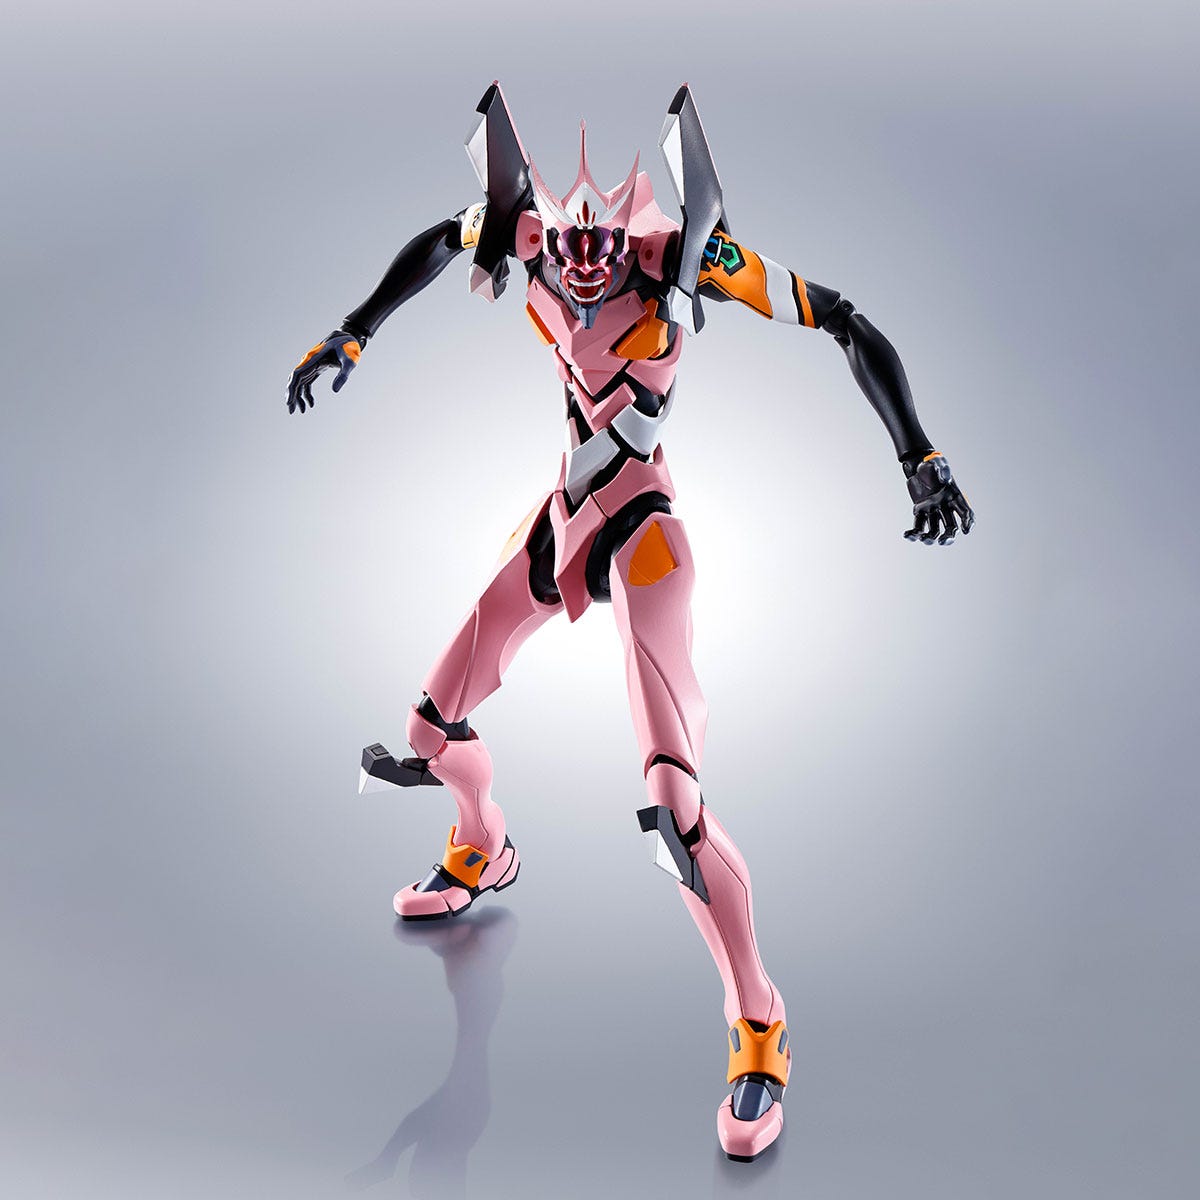 Evangelion Production Model-08 "Evangelion:3.0+1.0 Thrice - Dirt Cheap RC SAVING YOU MONEY, ONE PART AT A TIME